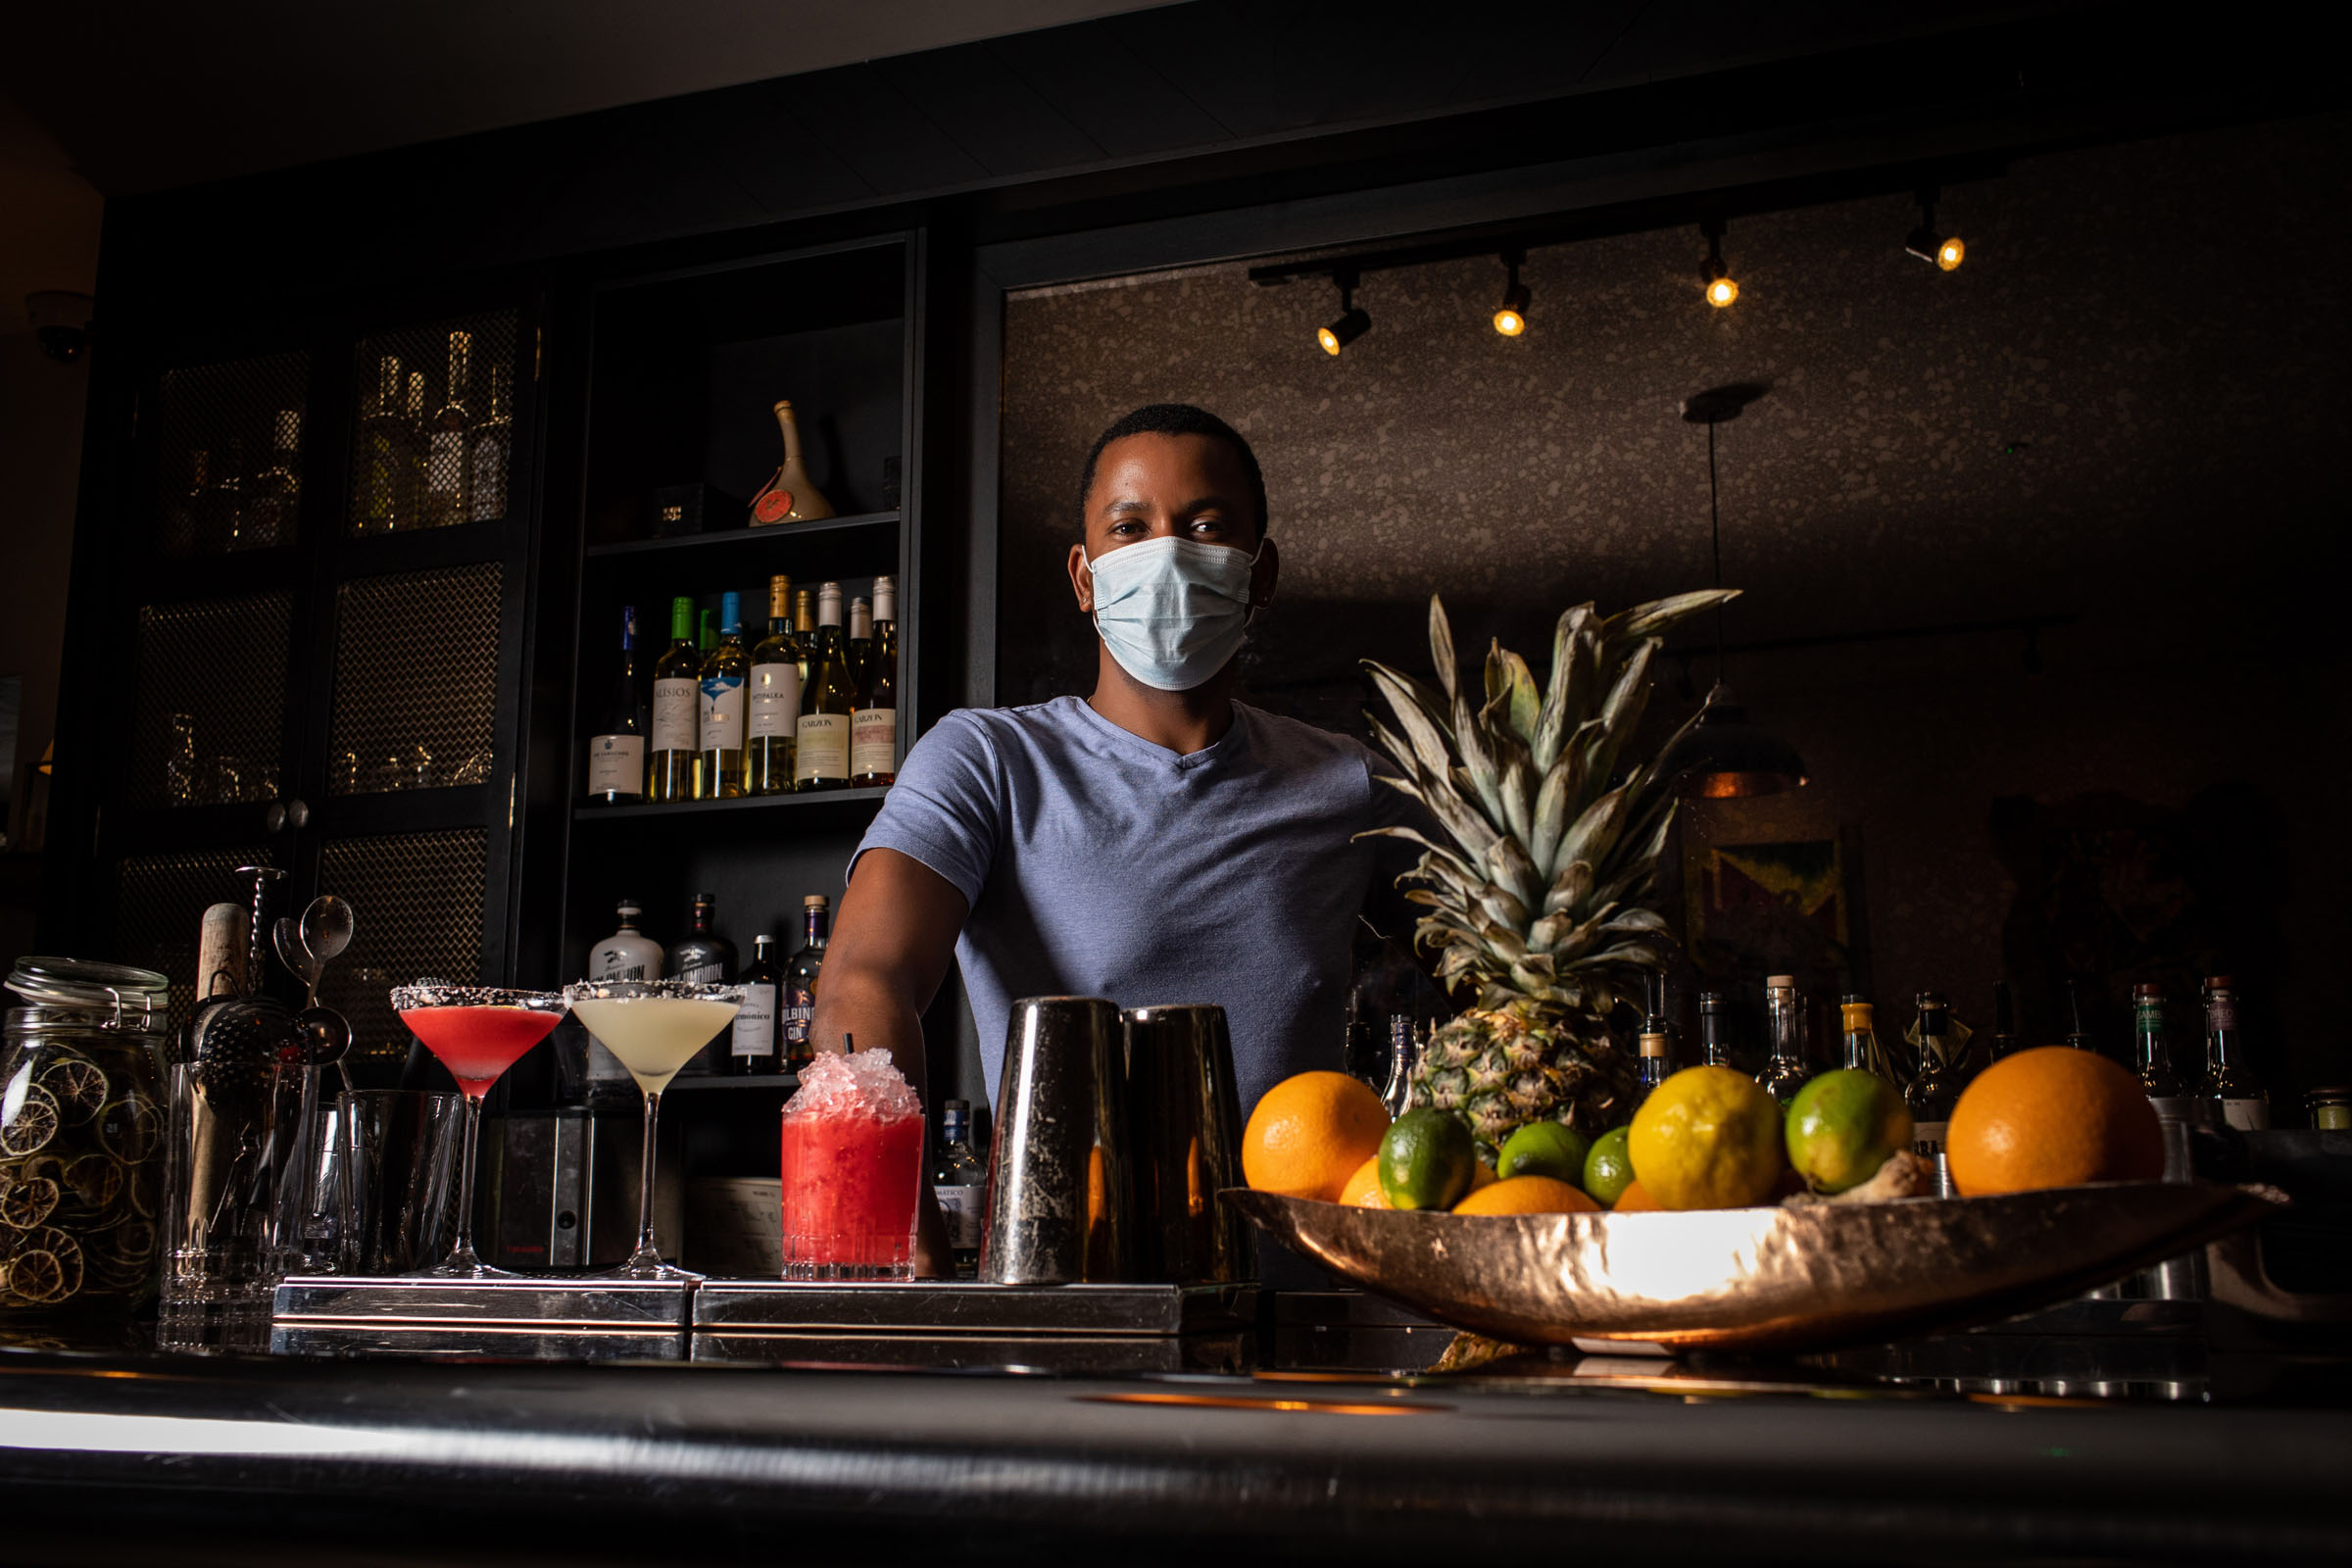 Yalain mixing cocktails in his mask at Paladar in London